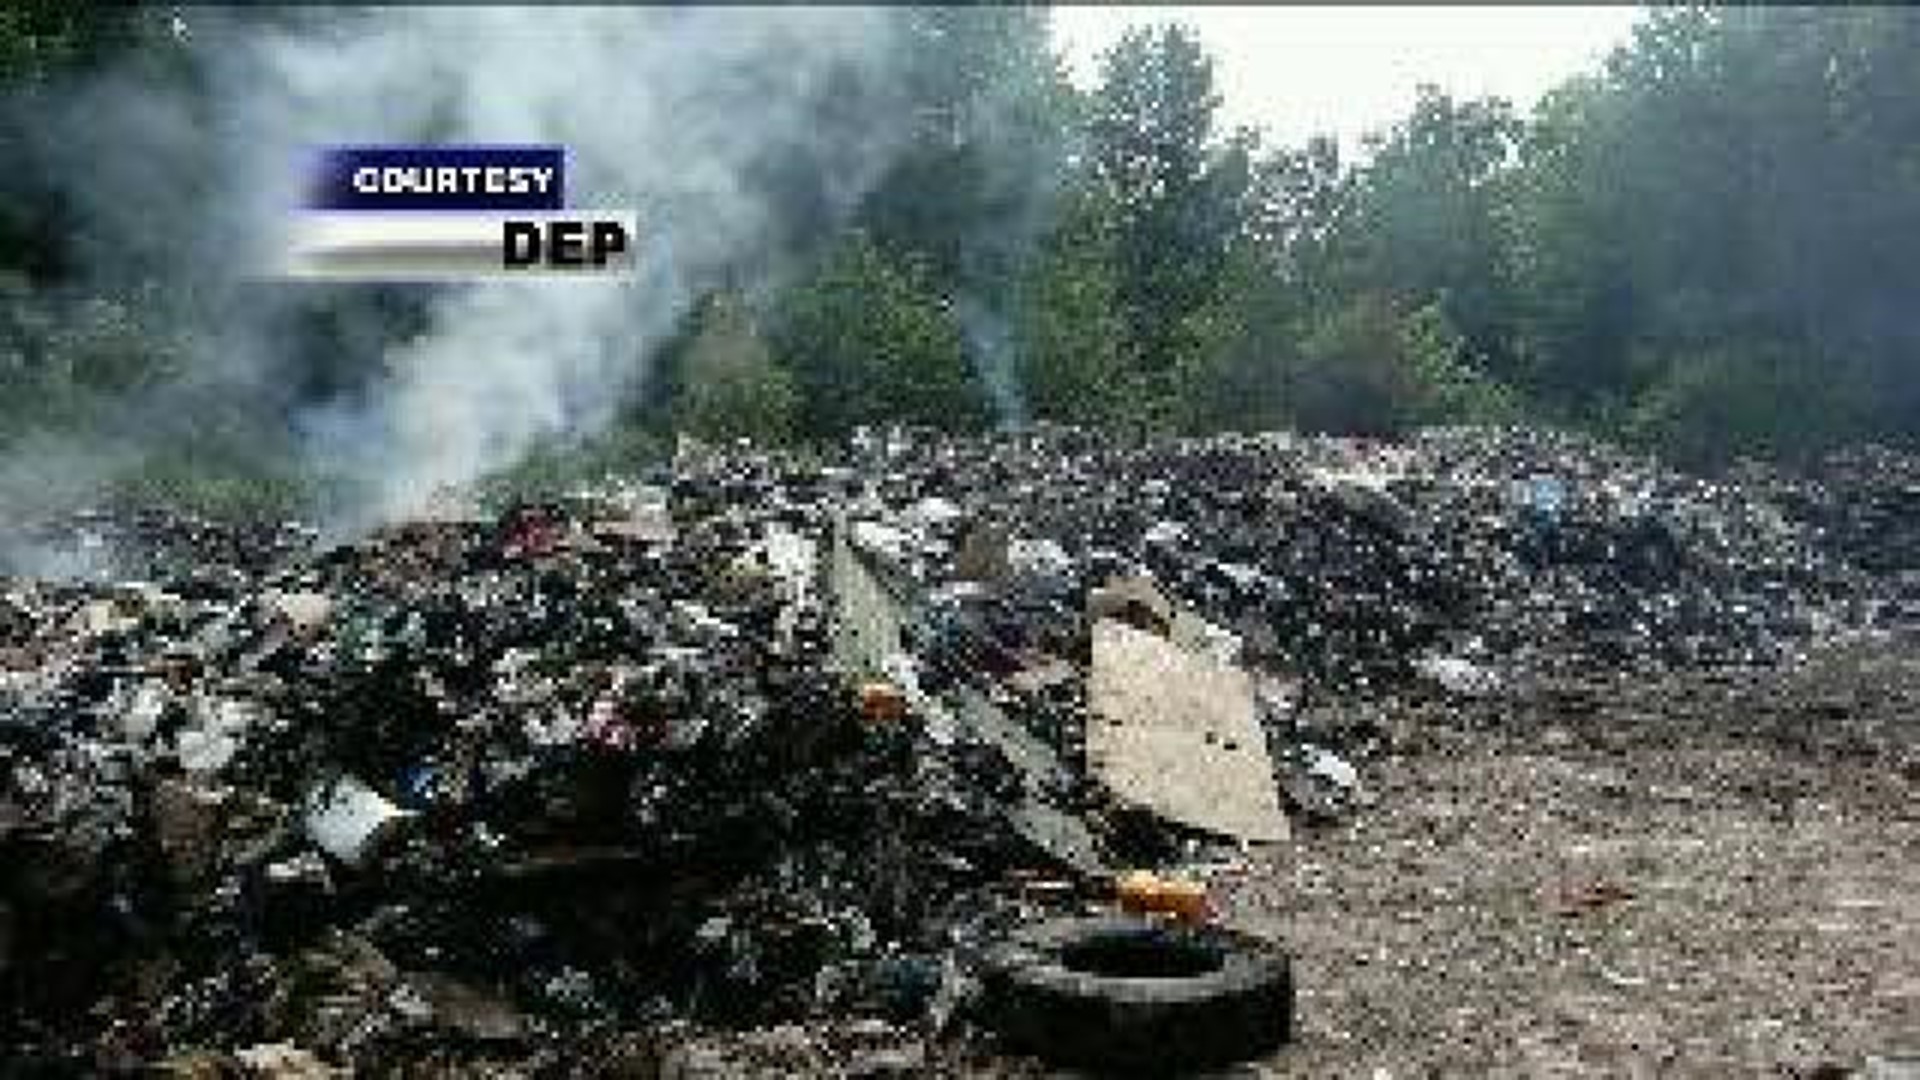 Camp Owners in Trouble with DEP After Trash Fire